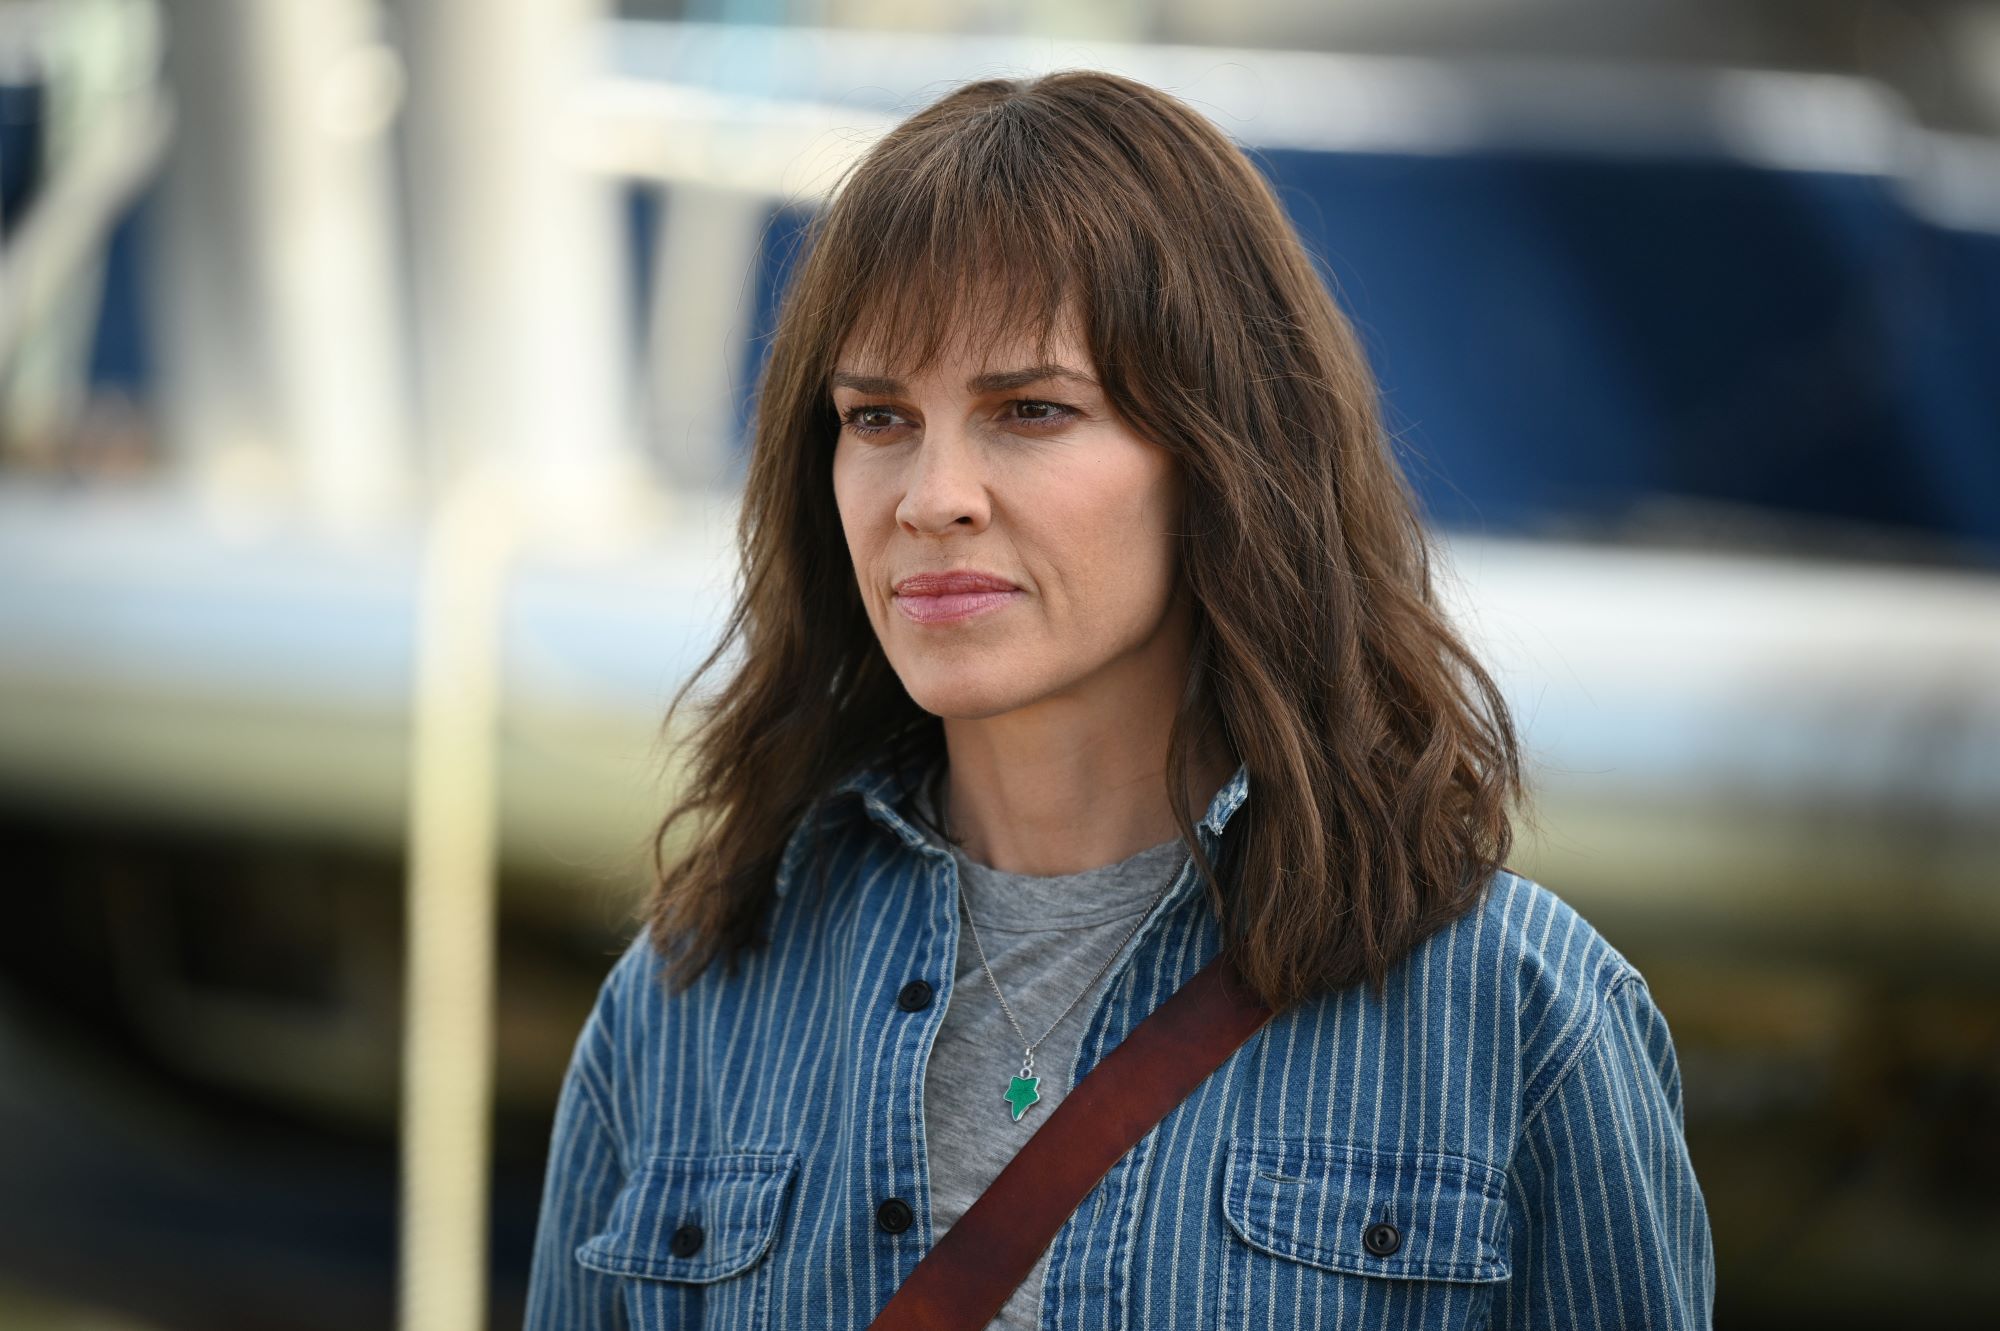 Hilary Swank, in character as Eileen in the show 'Alaska Daily' on ABC, wears a blue and white striped button-up shirt over a light gray shirt.